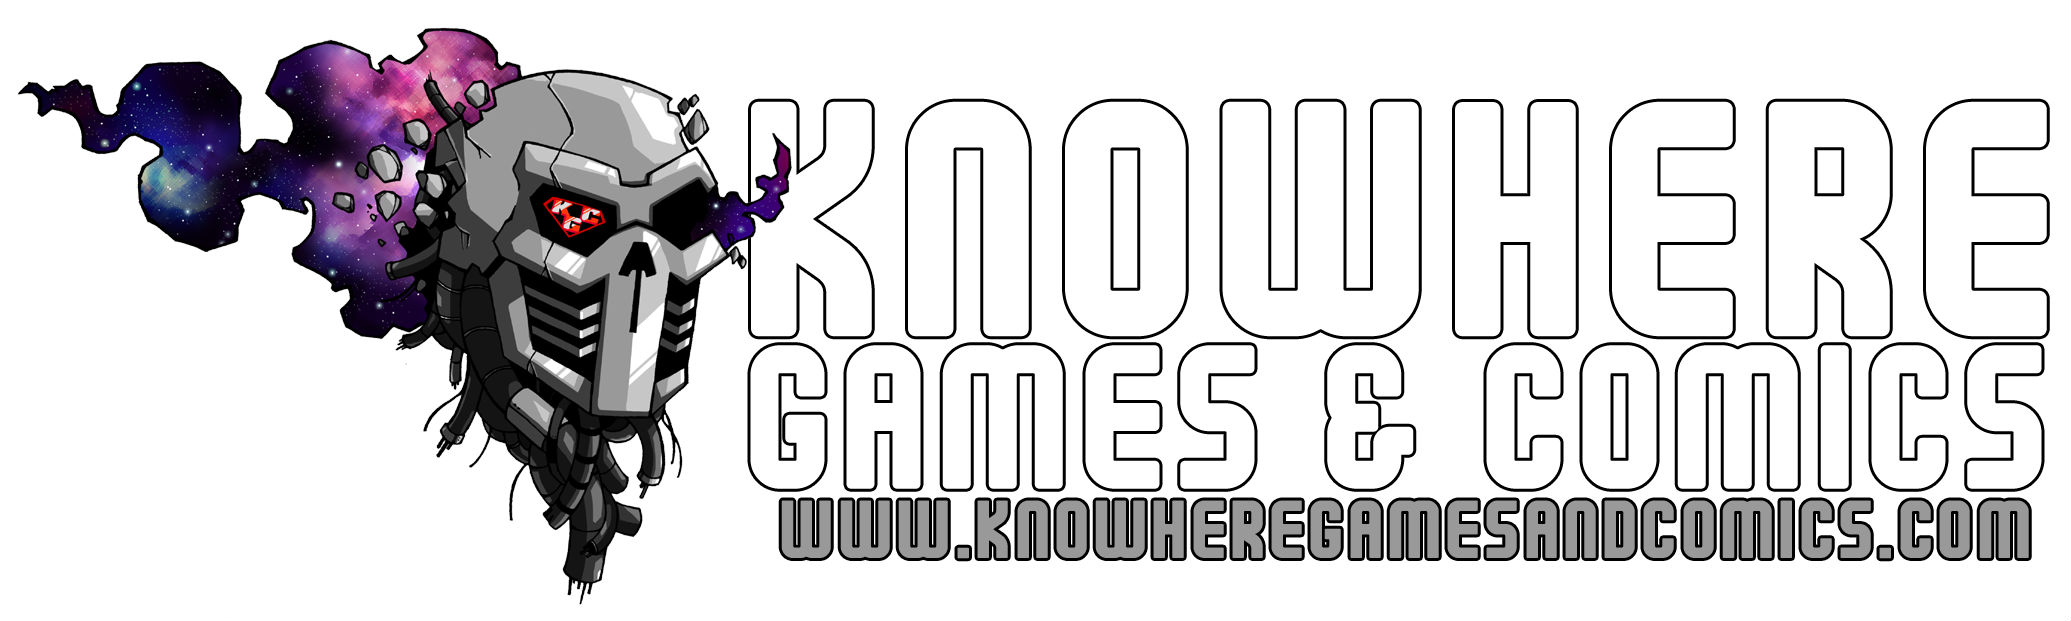 KNOWHERE GAMES AND COMICS